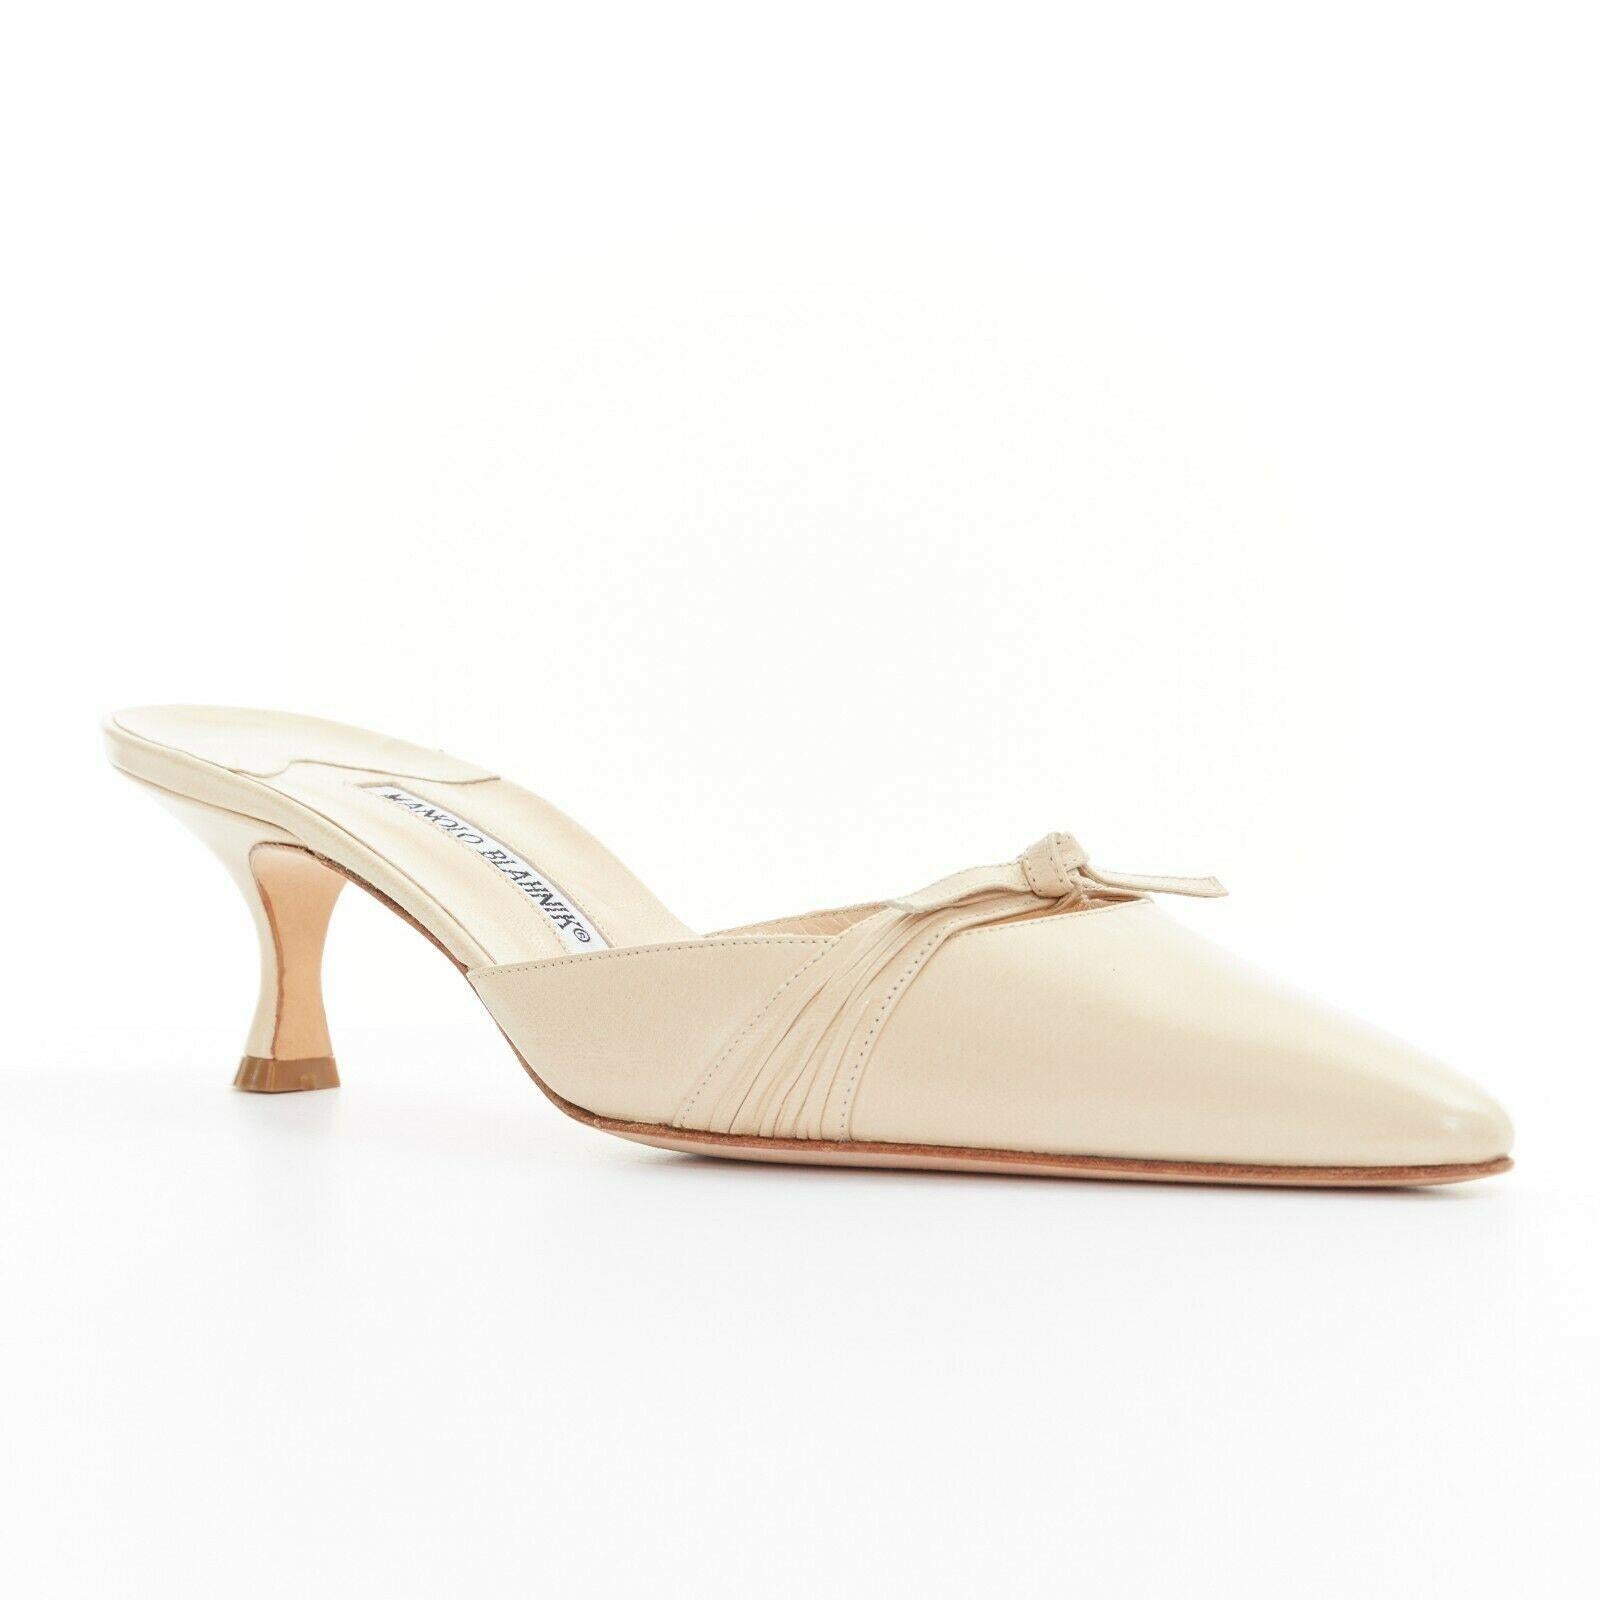 new MANOLO BLAHNIK nude bow point toe slip on curved kitten heel mule EU38

MANOLO BLAHNIK
Nude leather upper. Bow detail across toe box. Pointed toe. Curved kitten heel. Mule heels. Made in Italy.

CONDITION
New without box, minor scratches on